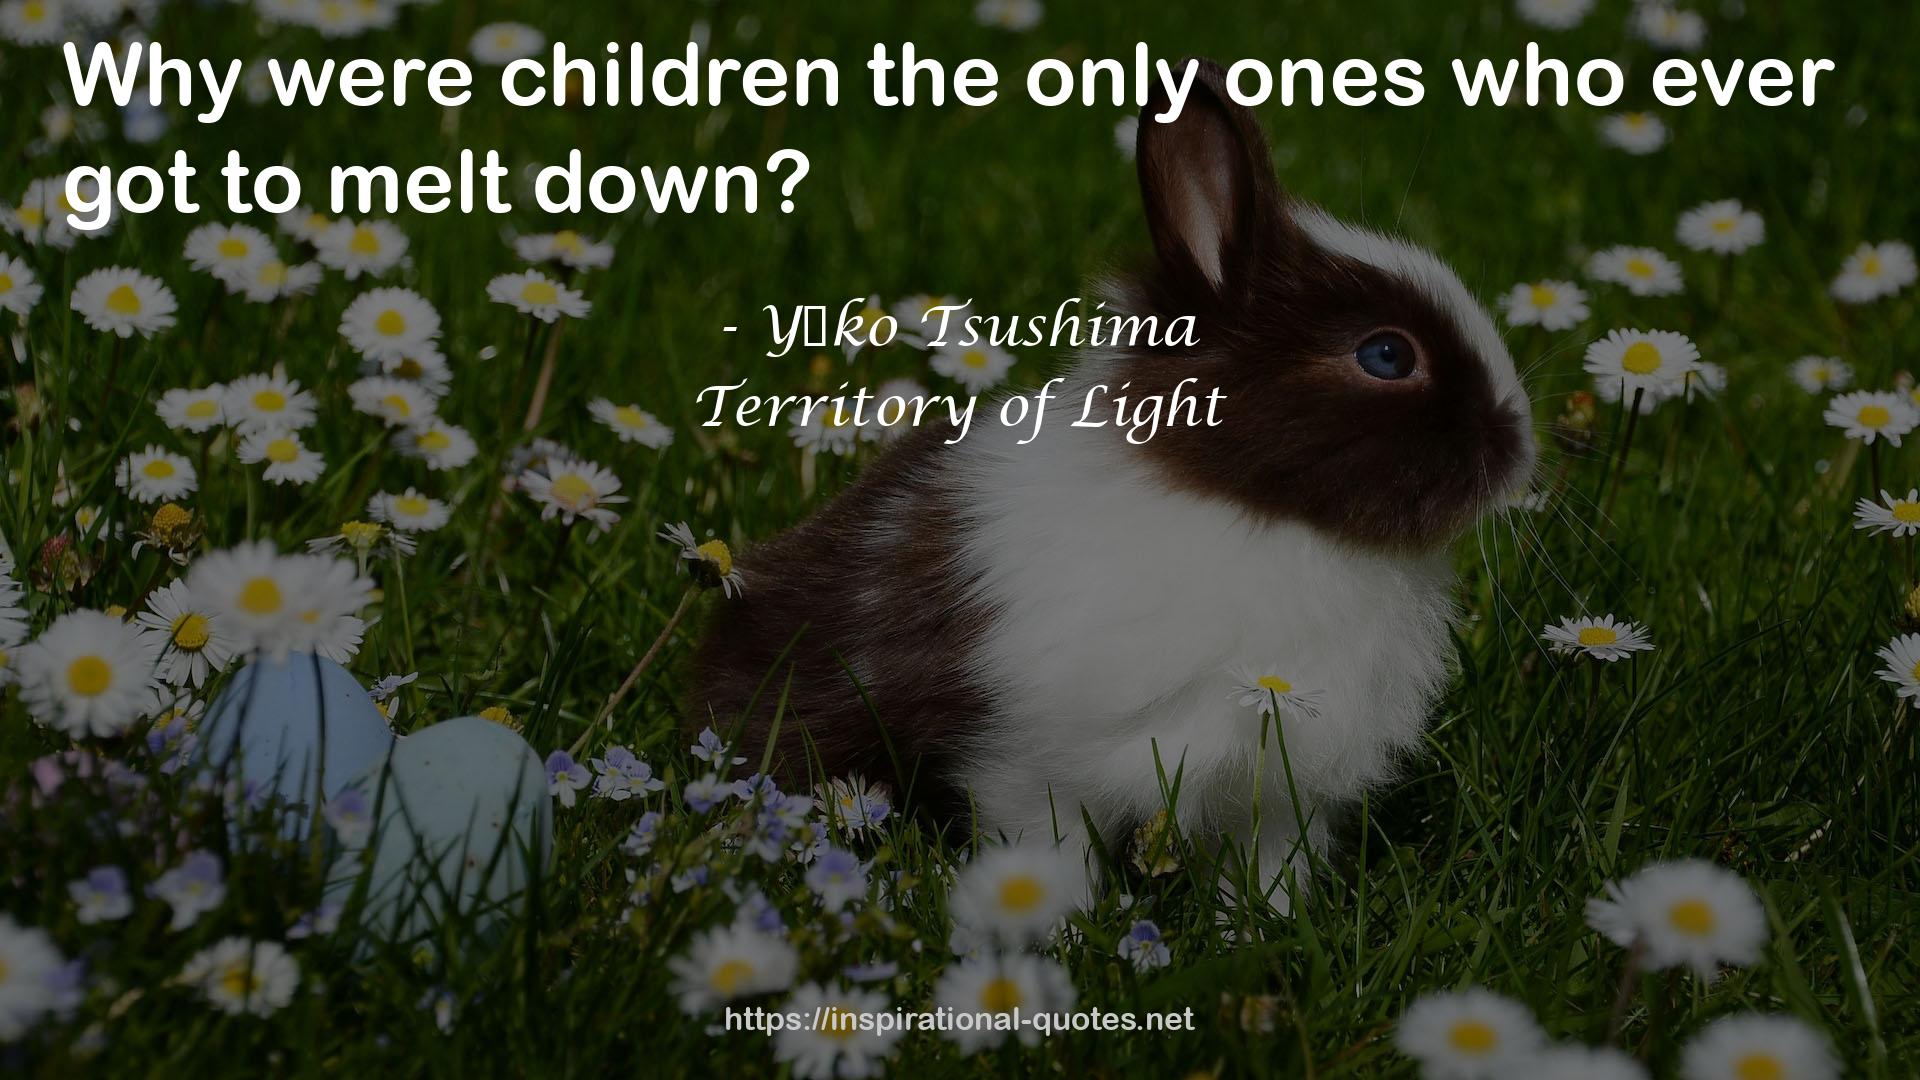 Territory of Light QUOTES